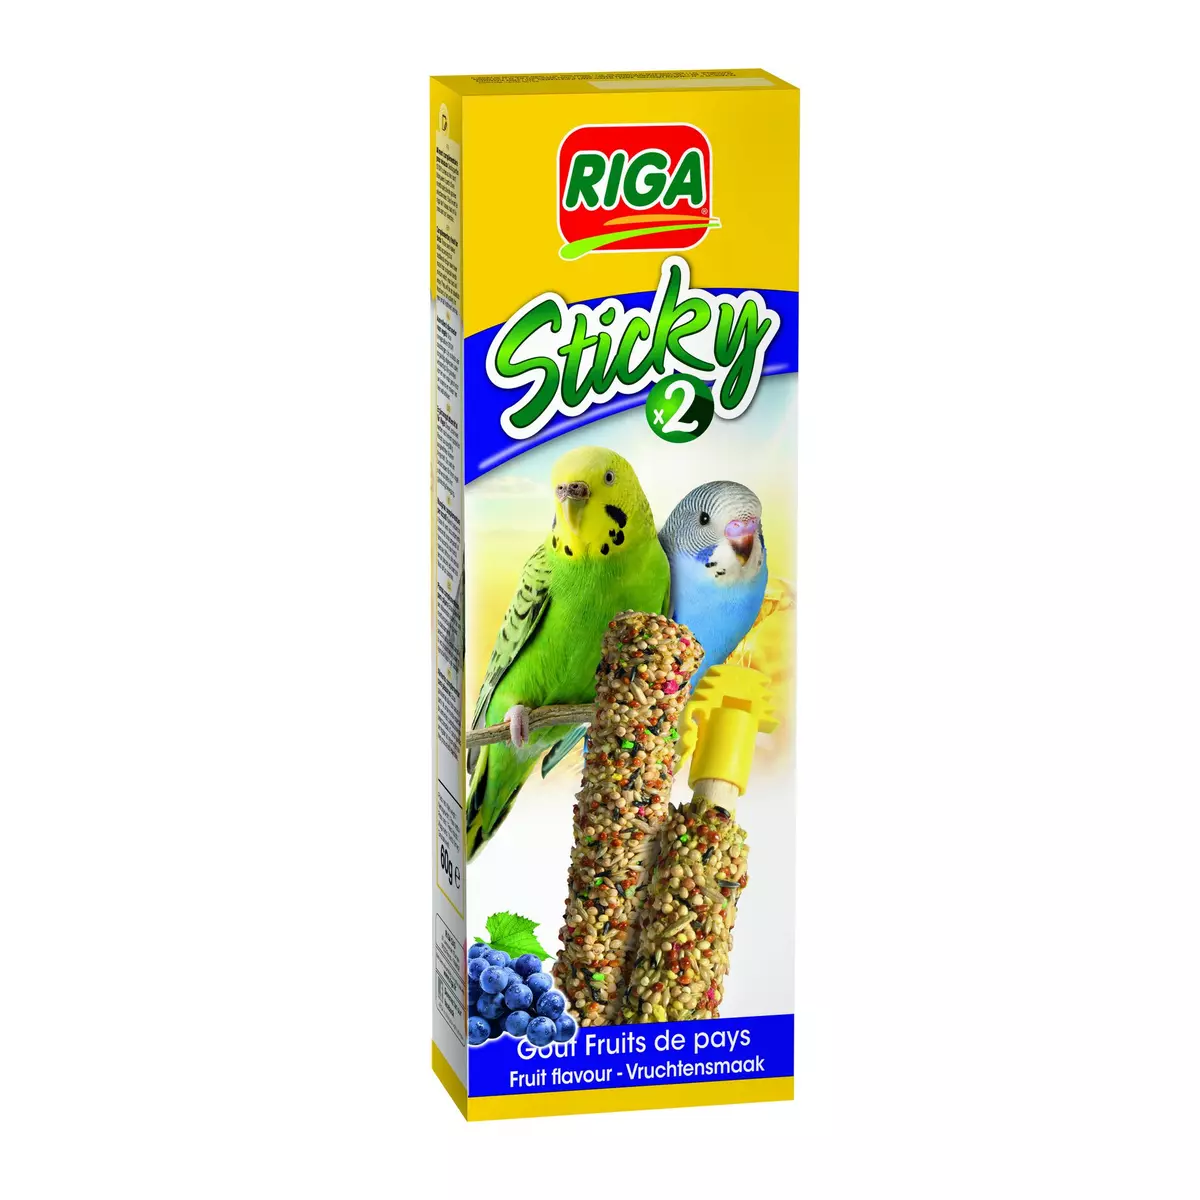 RIGA Sticky fruits du pays pour perruches 55g